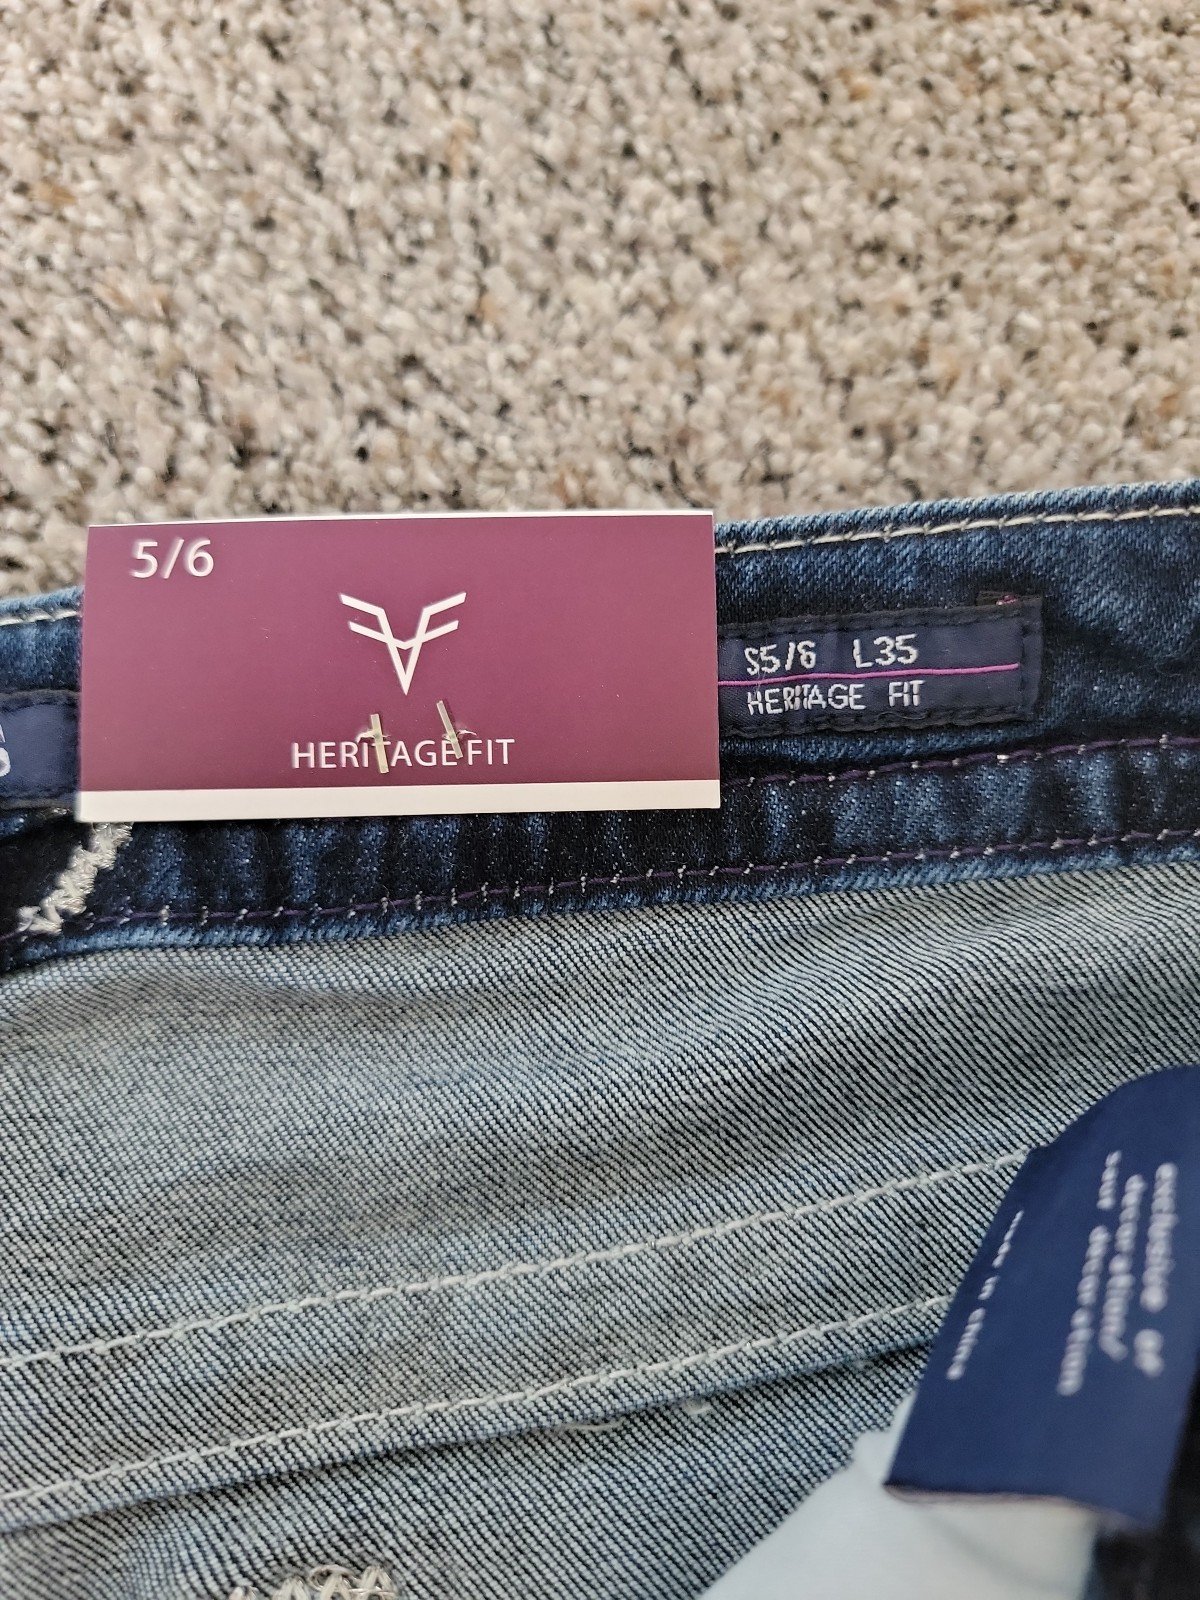 Affordable Vigoss NWT slim boot Jeans 5/6 35L or3kNu4Zf for sale